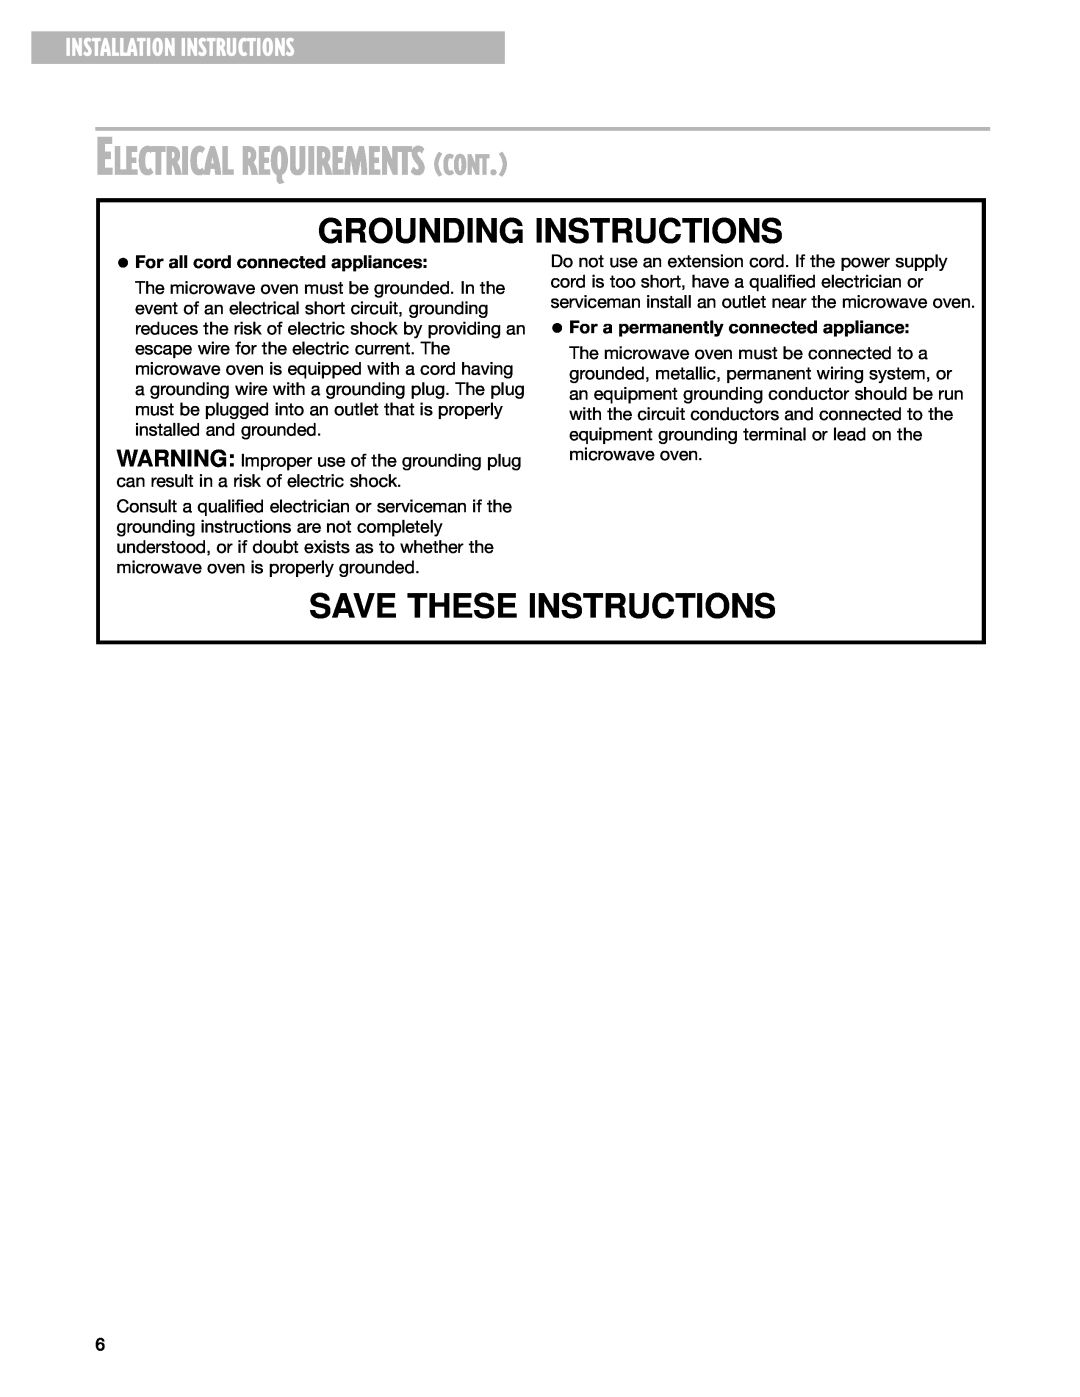 Whirlpool MT3135SH, MT3105SH Electrical Requirements Cont, Grounding Instructions, Installation Instructions 